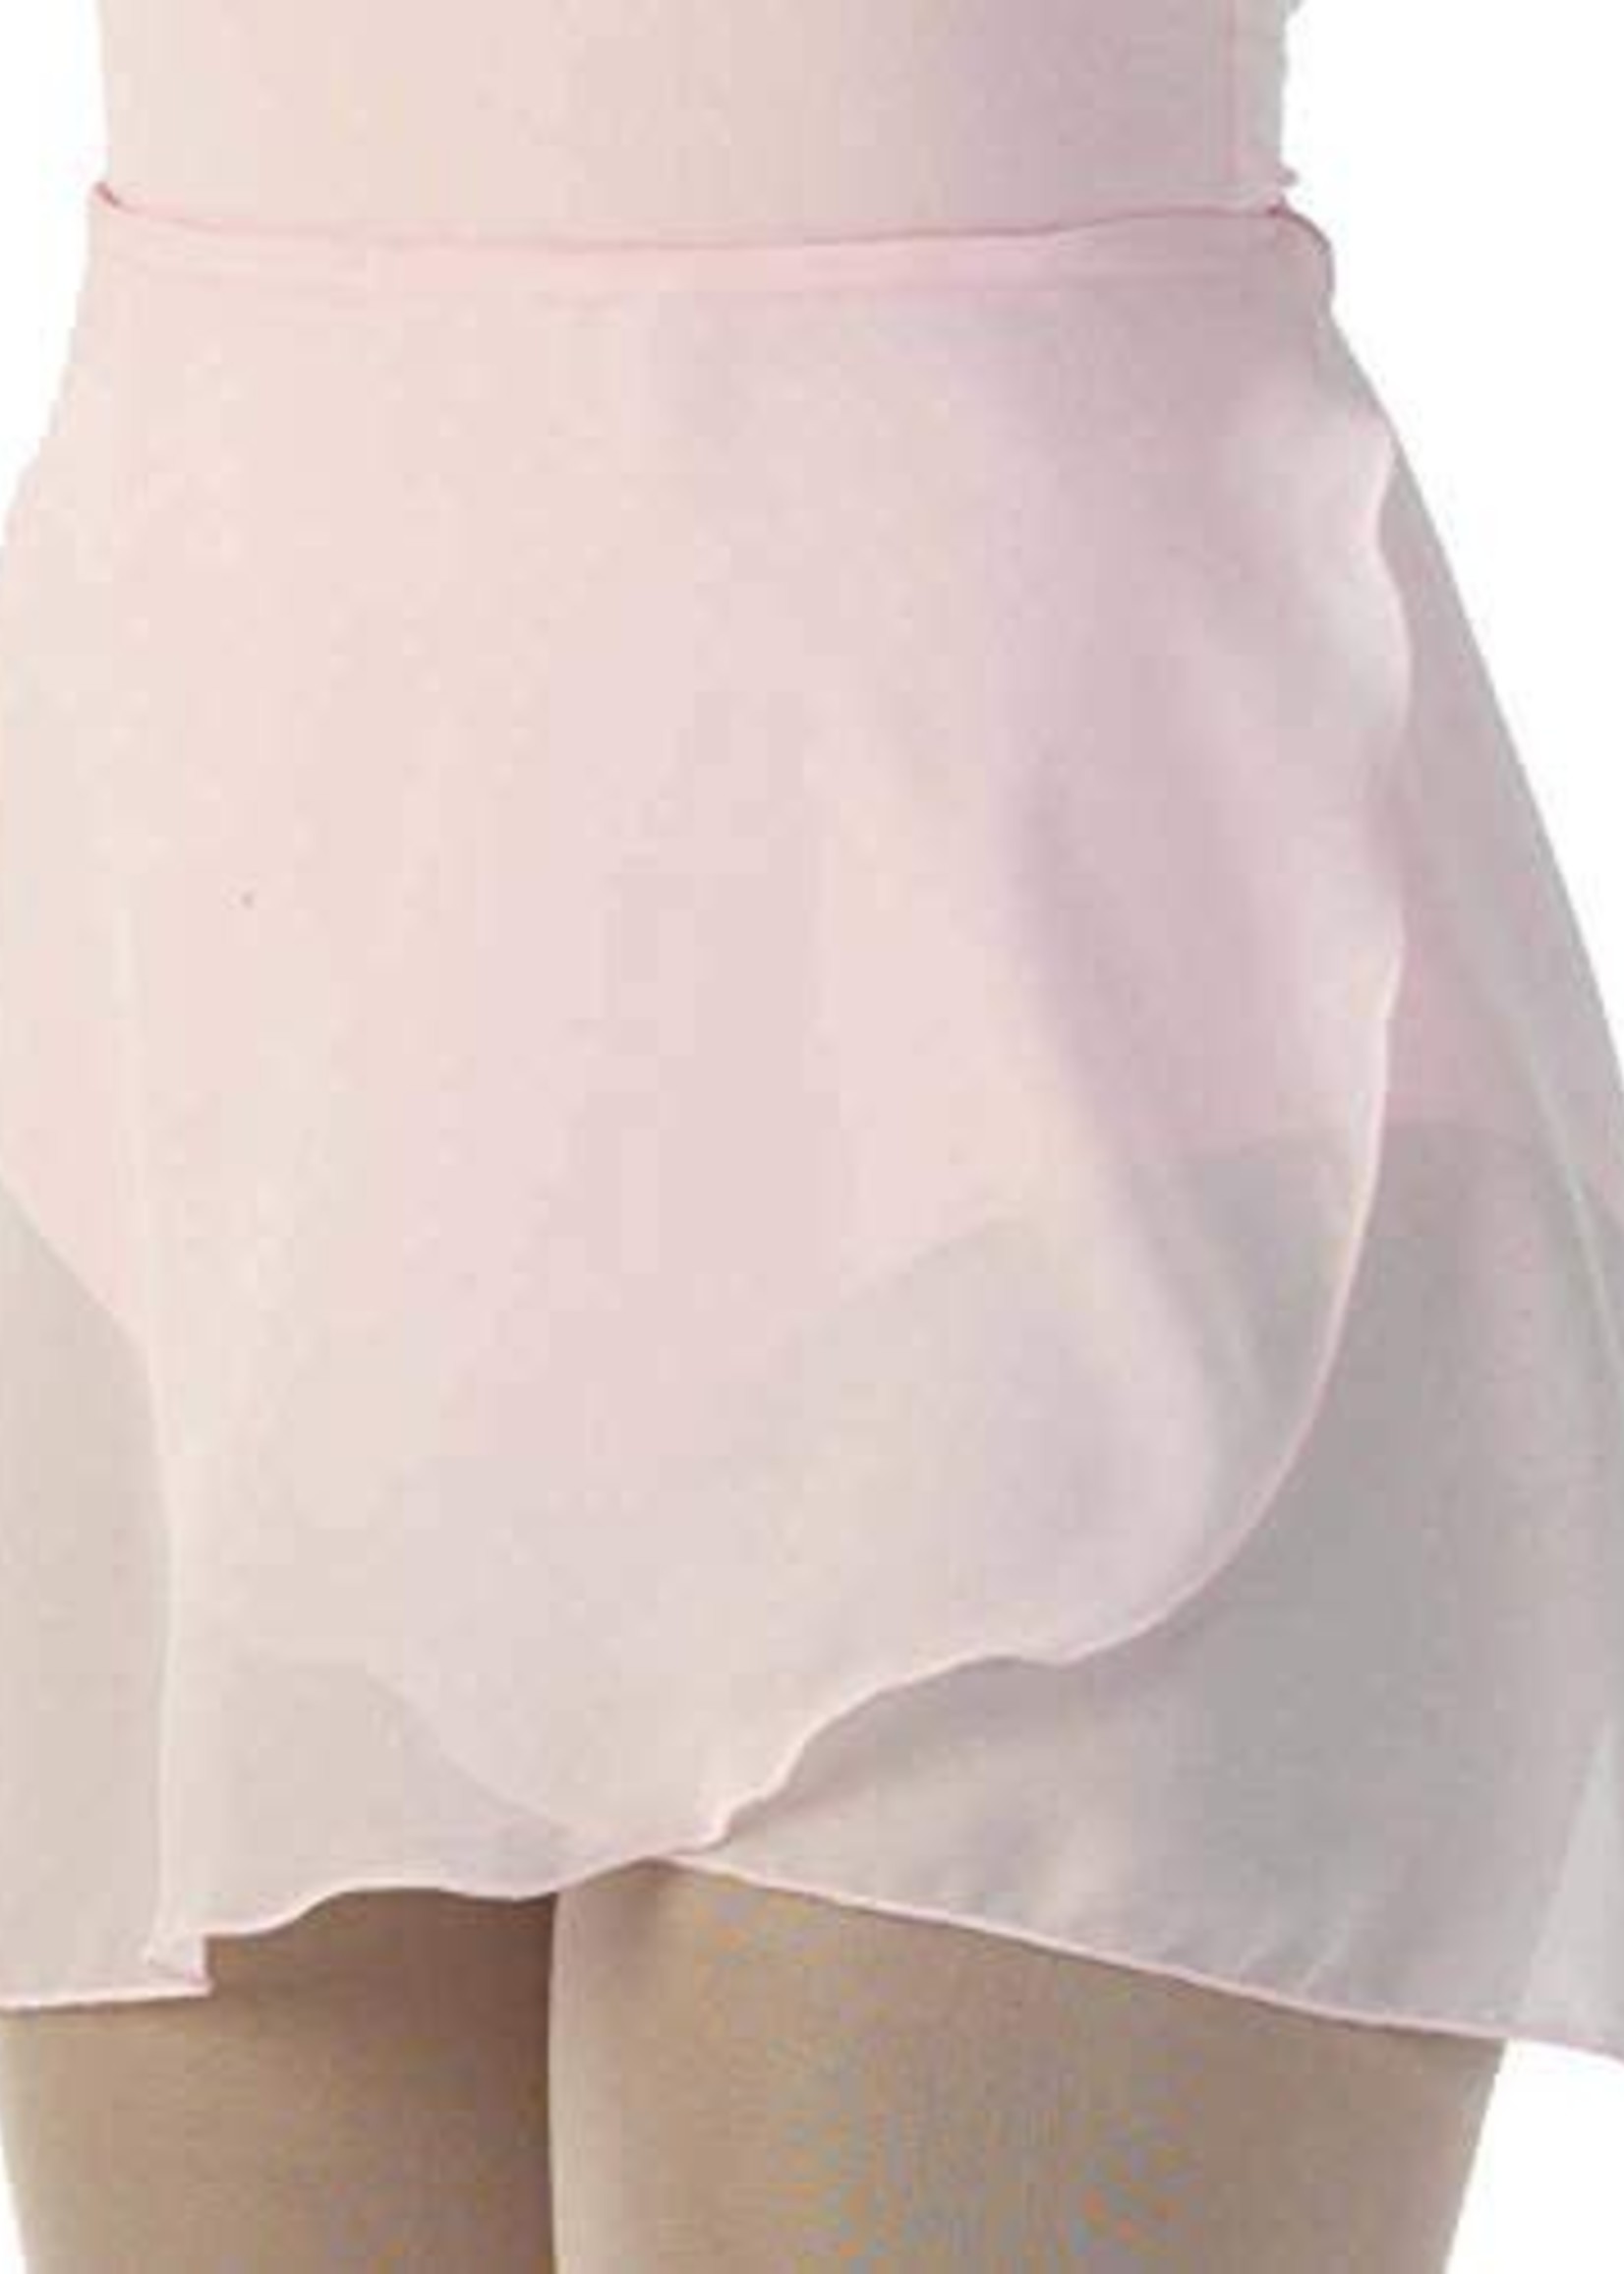 Body Wrappers Body Wrappers 15" Wrap Skirt